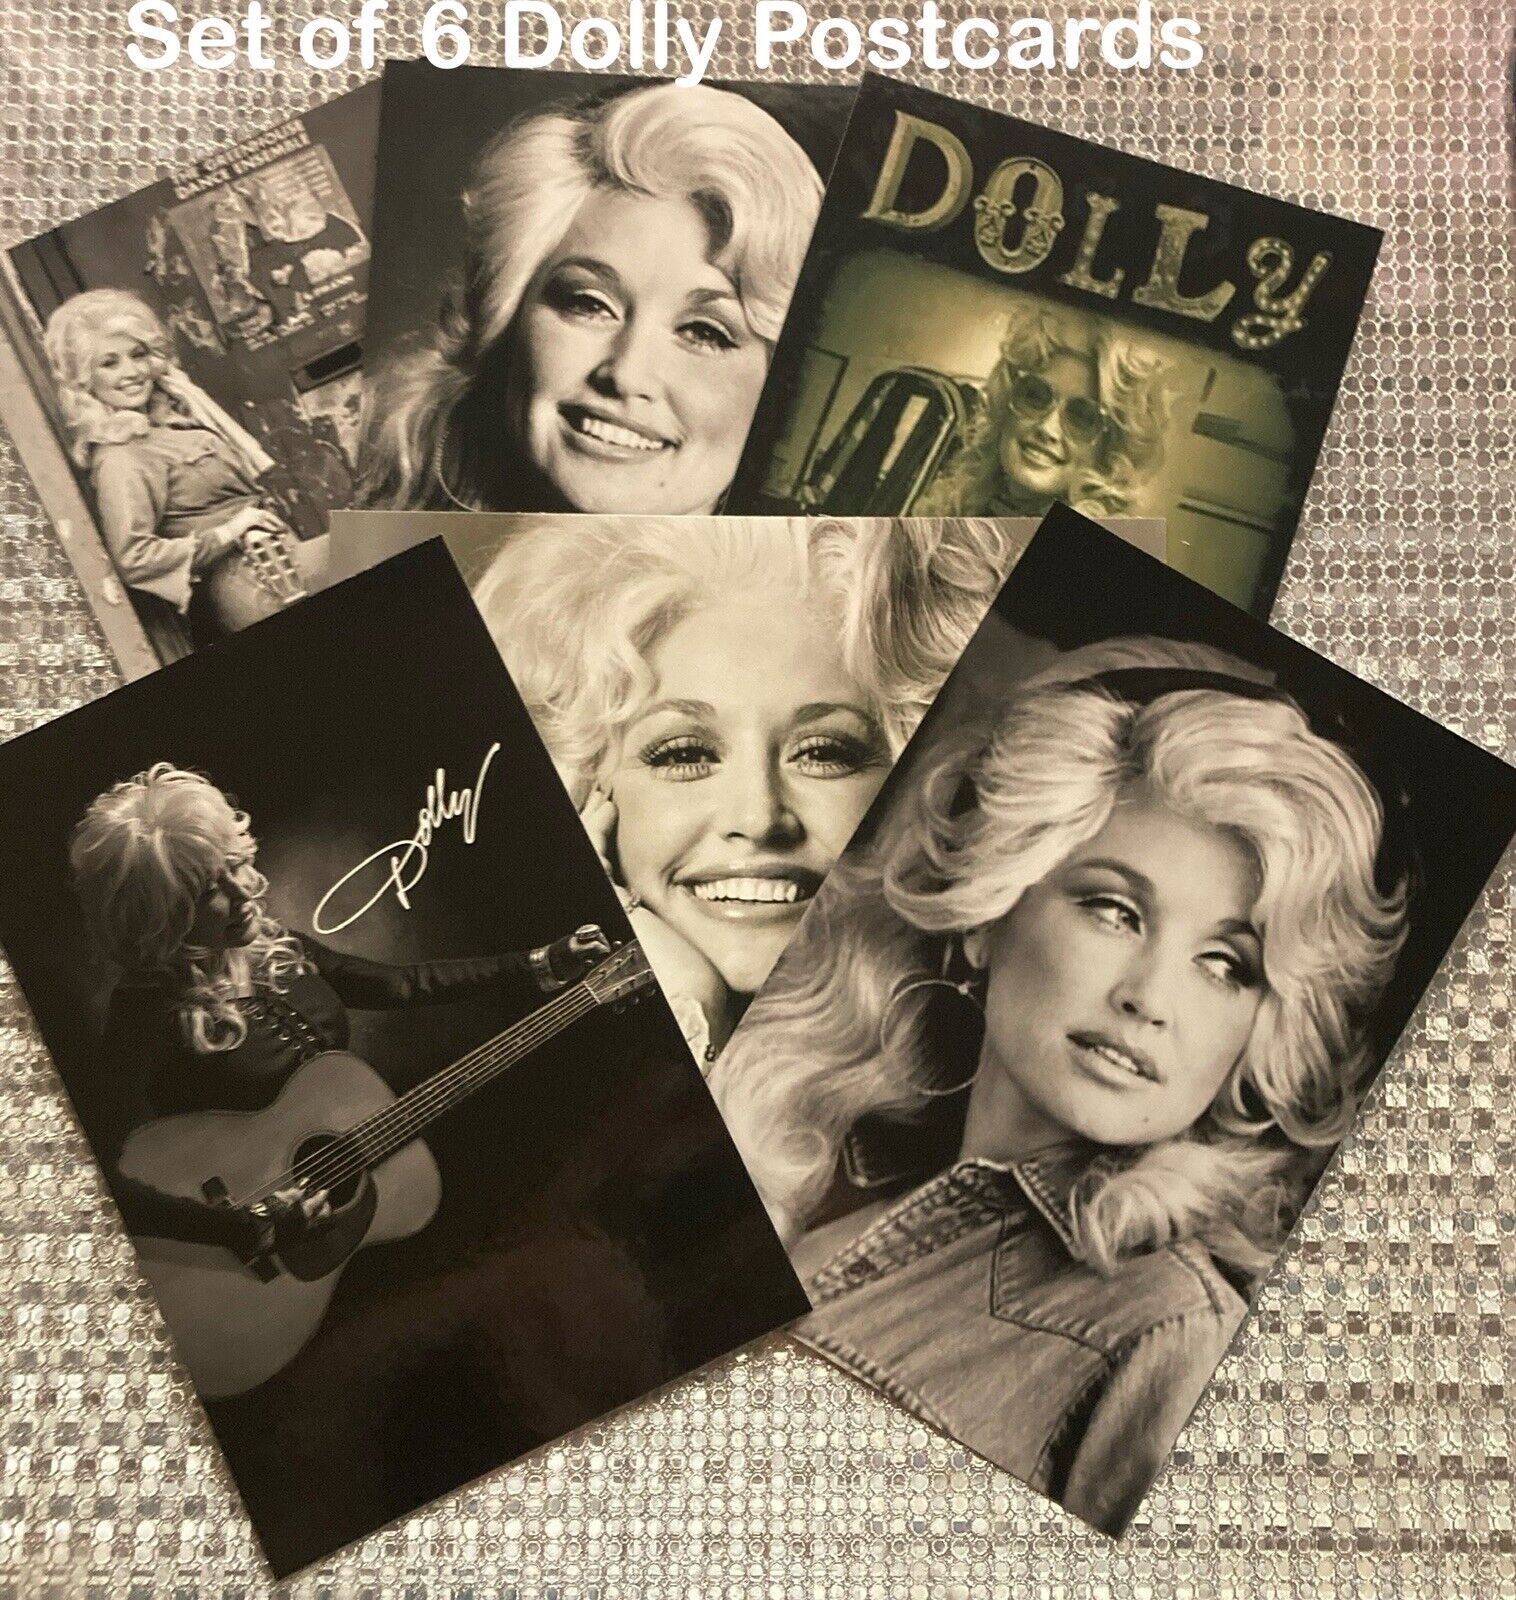 Set Of 6 Dolly Parton Postcards From Dollywood